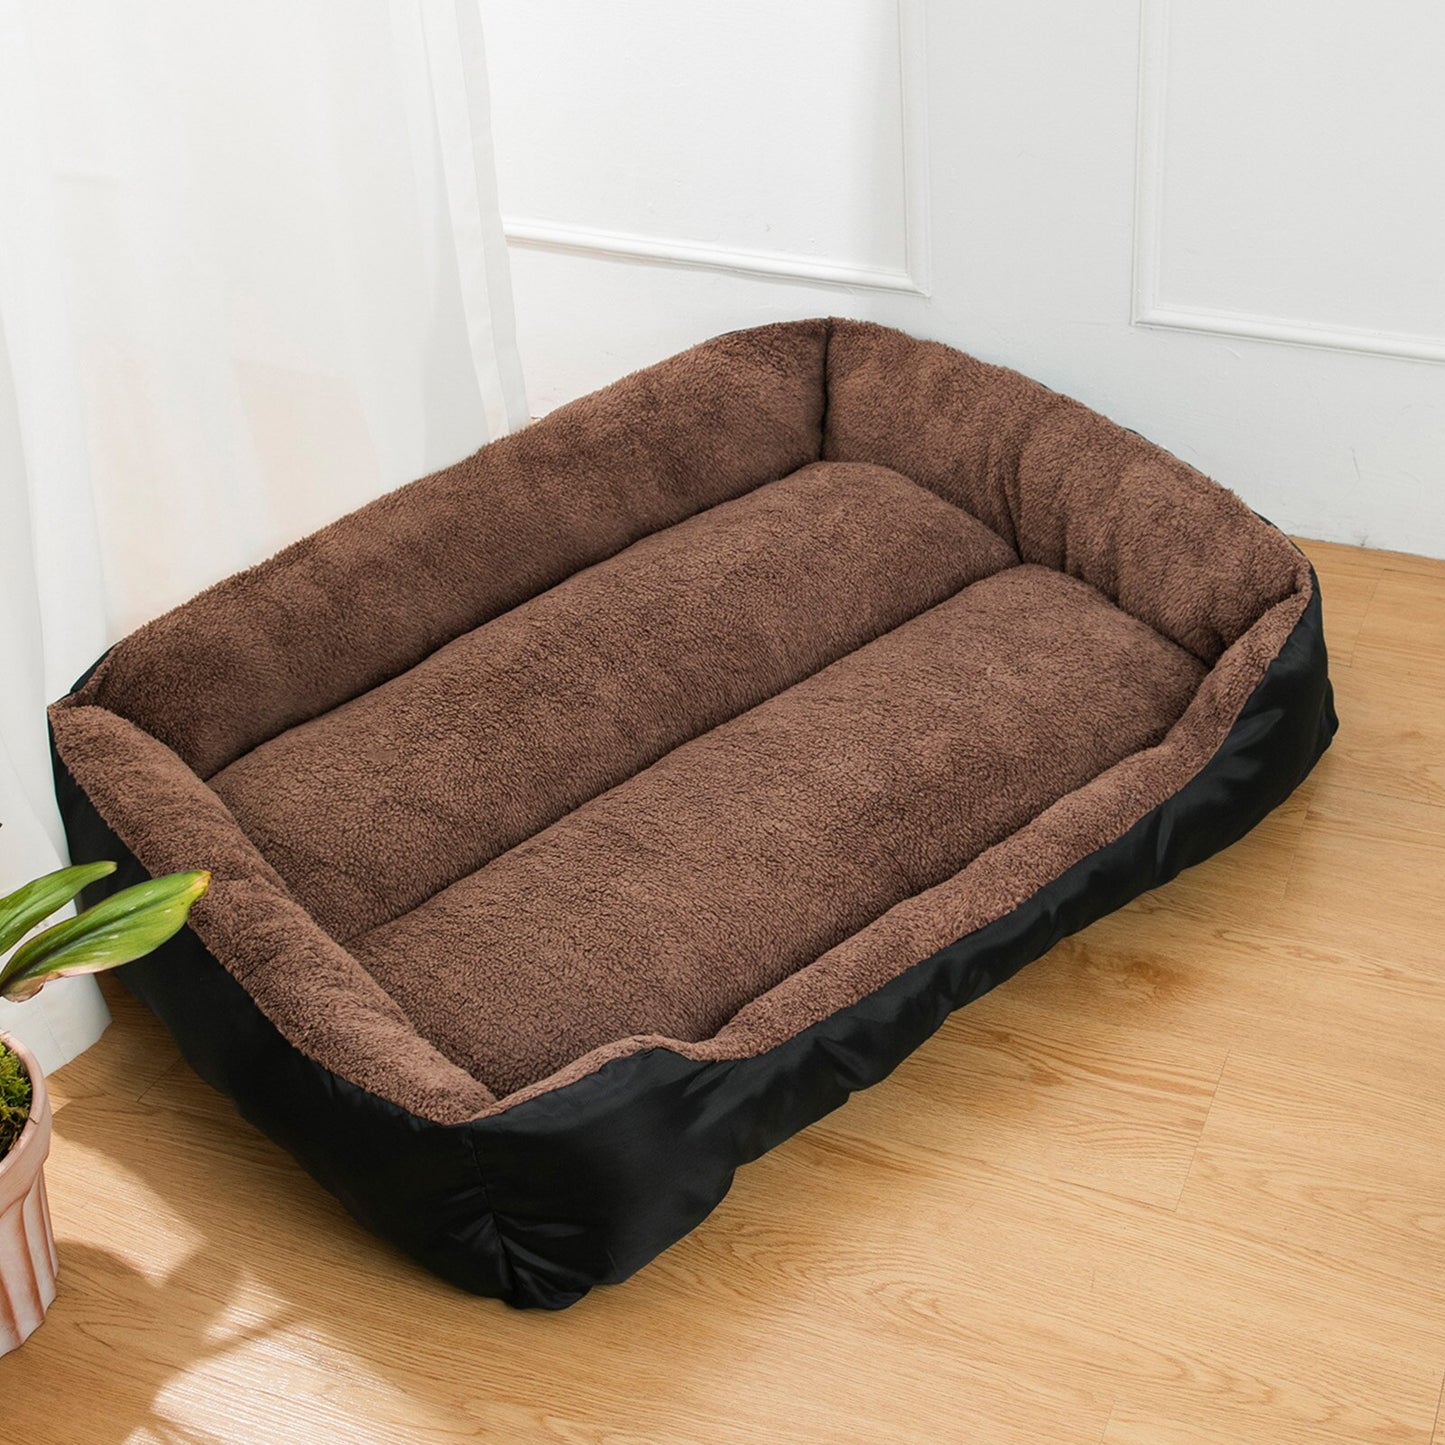 Dog Sofa Pet Beds Supplies Puppy Accessories Blanket Bed Bad Large Small Mat Accessory Dogs Basket Pets Baskets Bedding Cushions